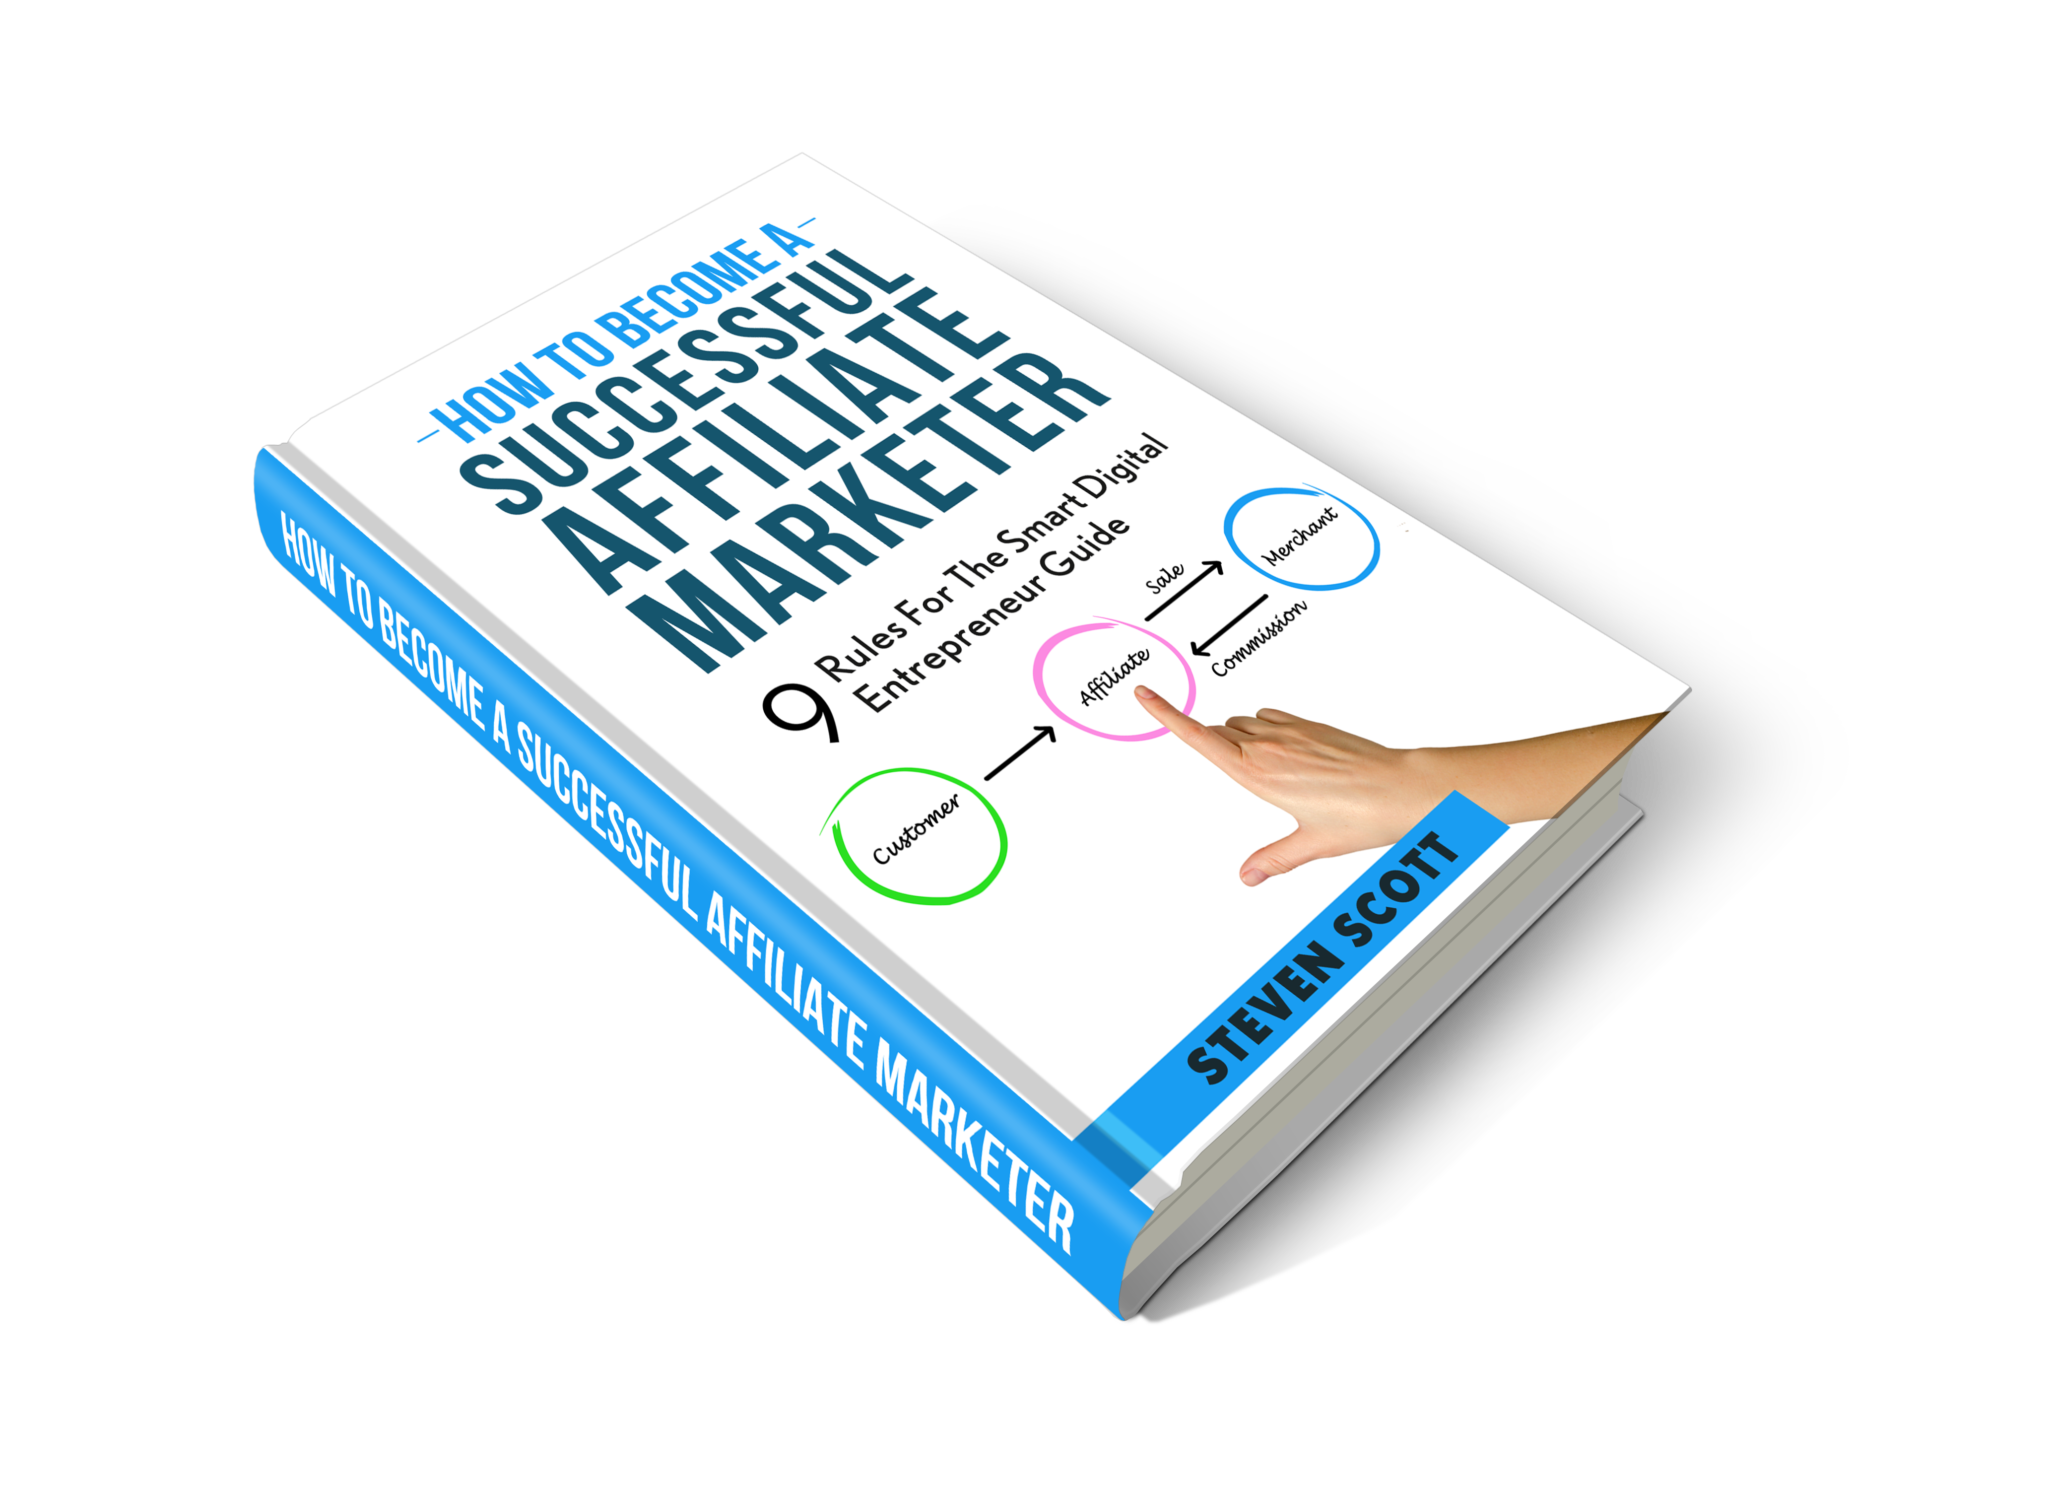 FREE: How To Become A Successful Affiliate Marker: 9 Rules For The Smart Digital Entrepreneur Guide by Steven Scott